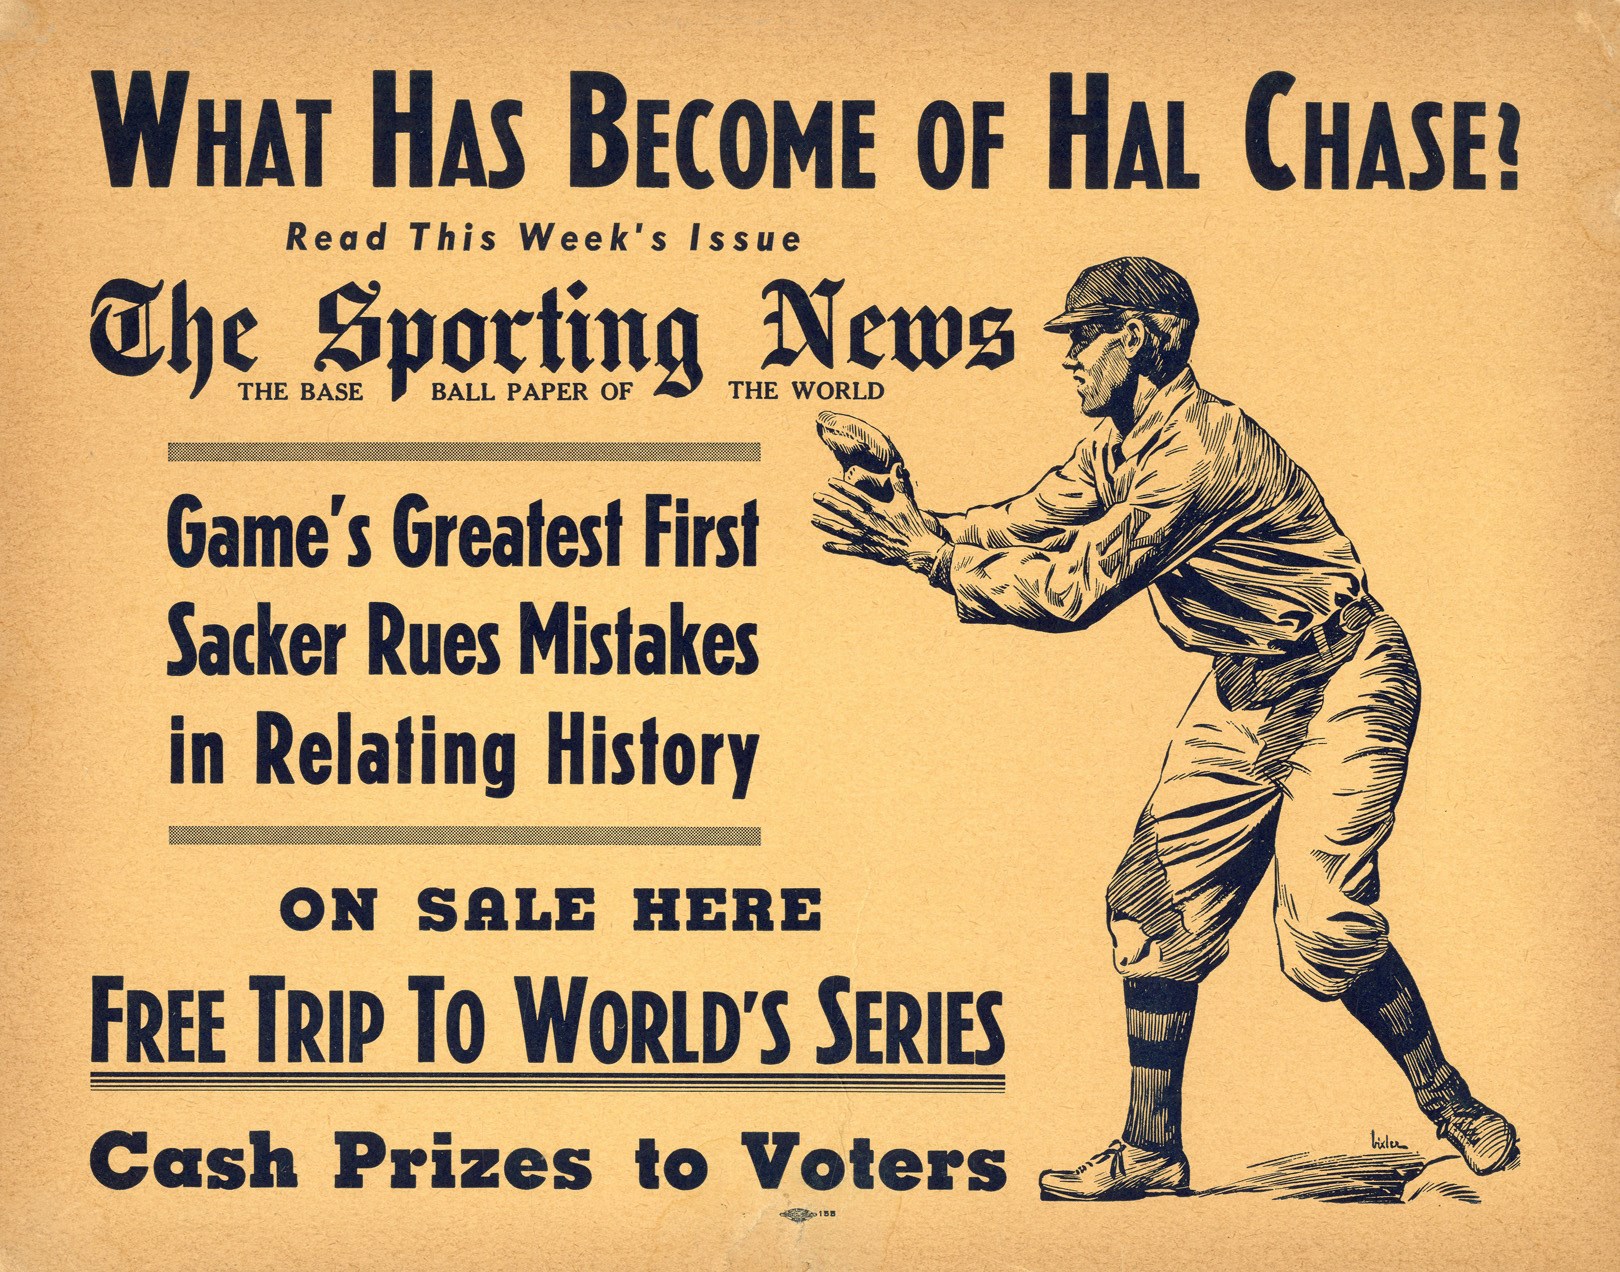 1941 Hal Chase Sporting News Advertising Poster